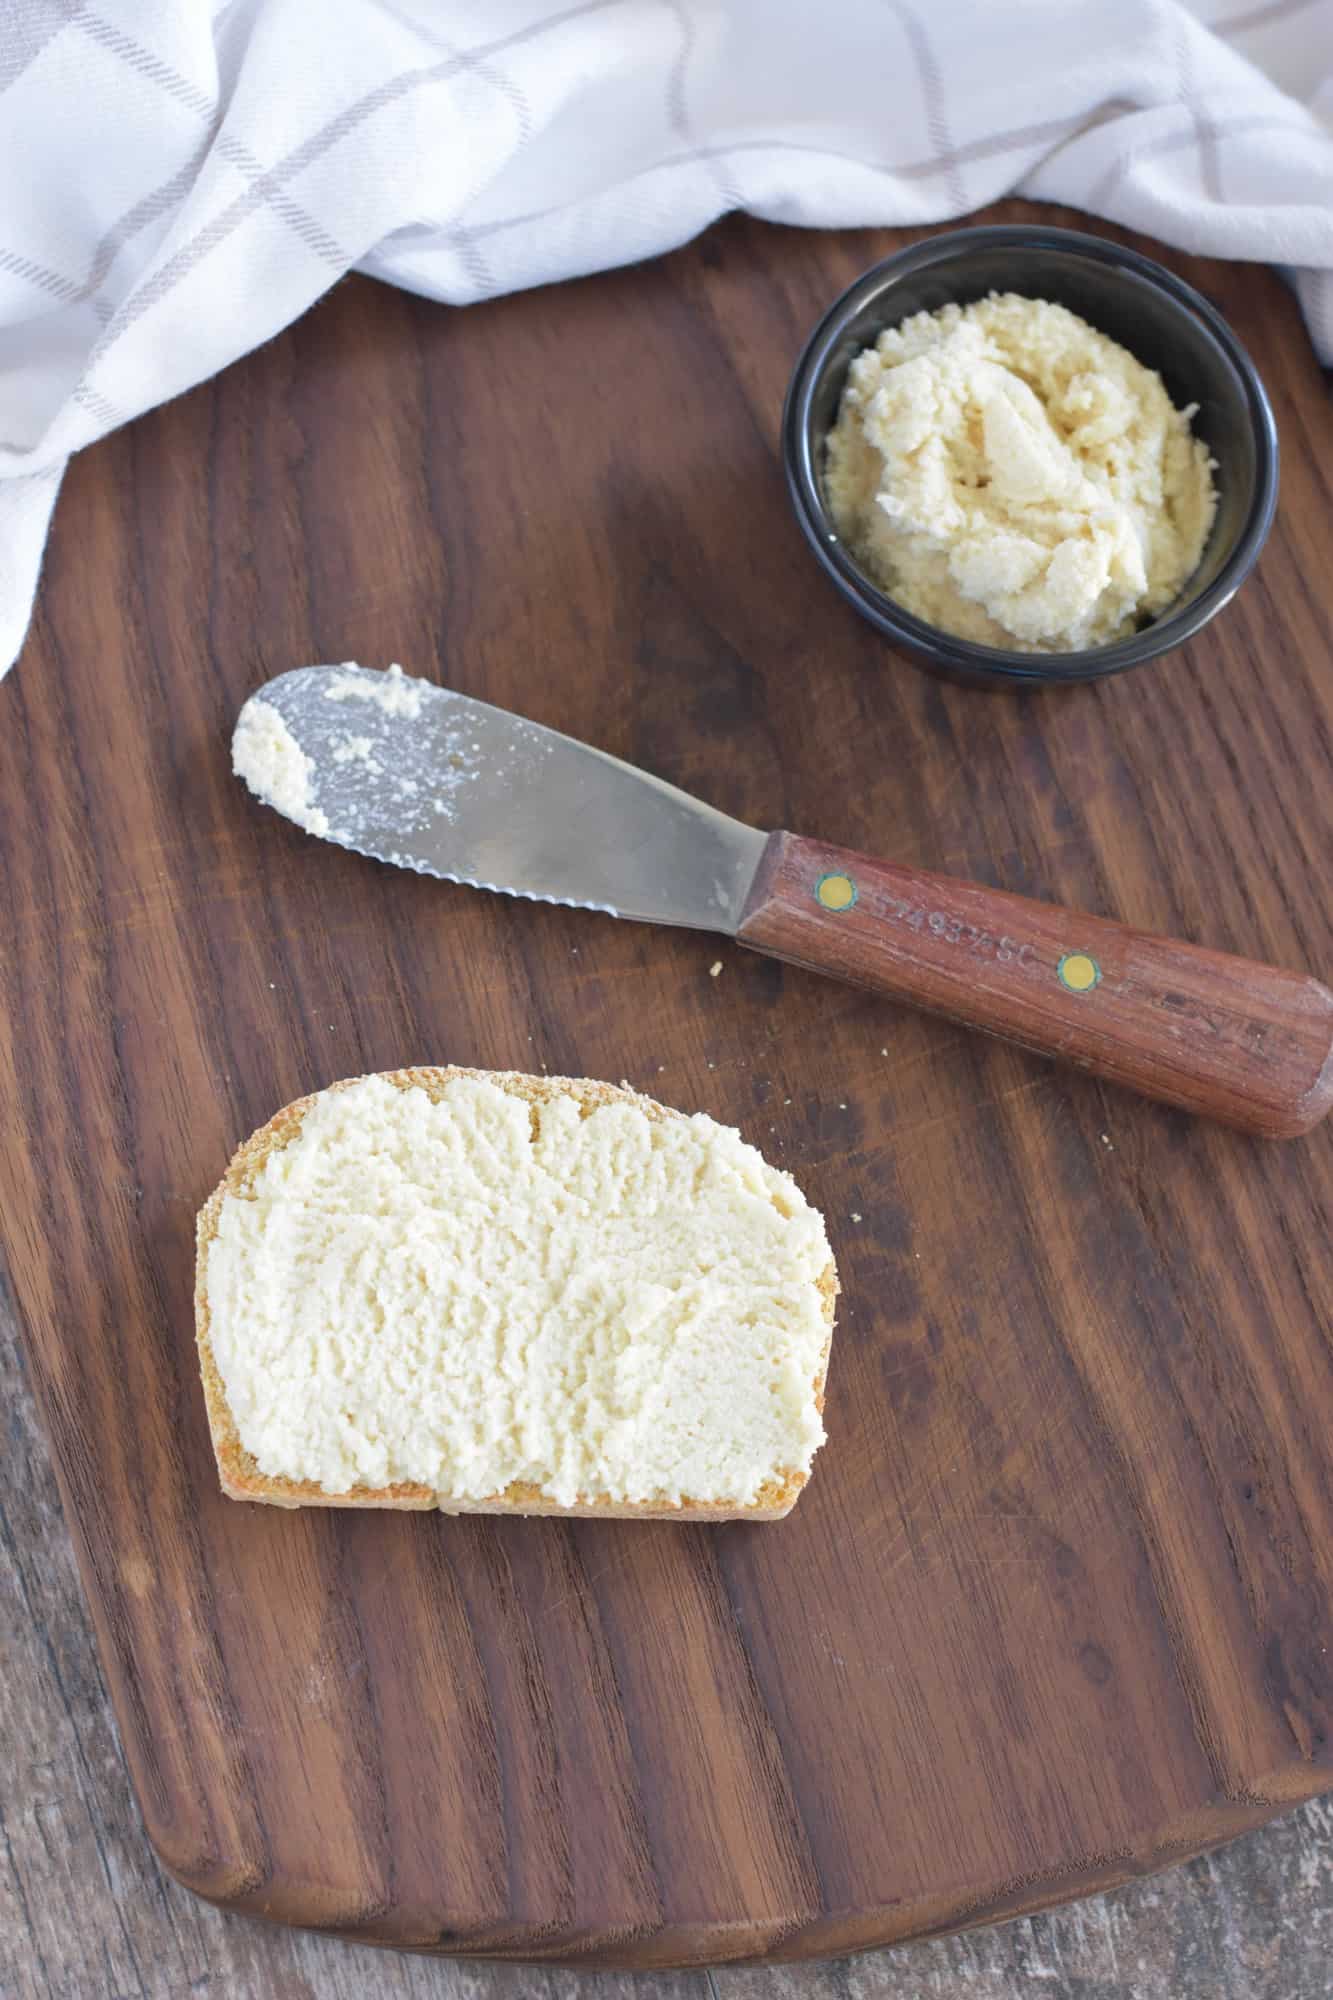 dairy-free ricotta spread onto one slice of toast on a wooden board